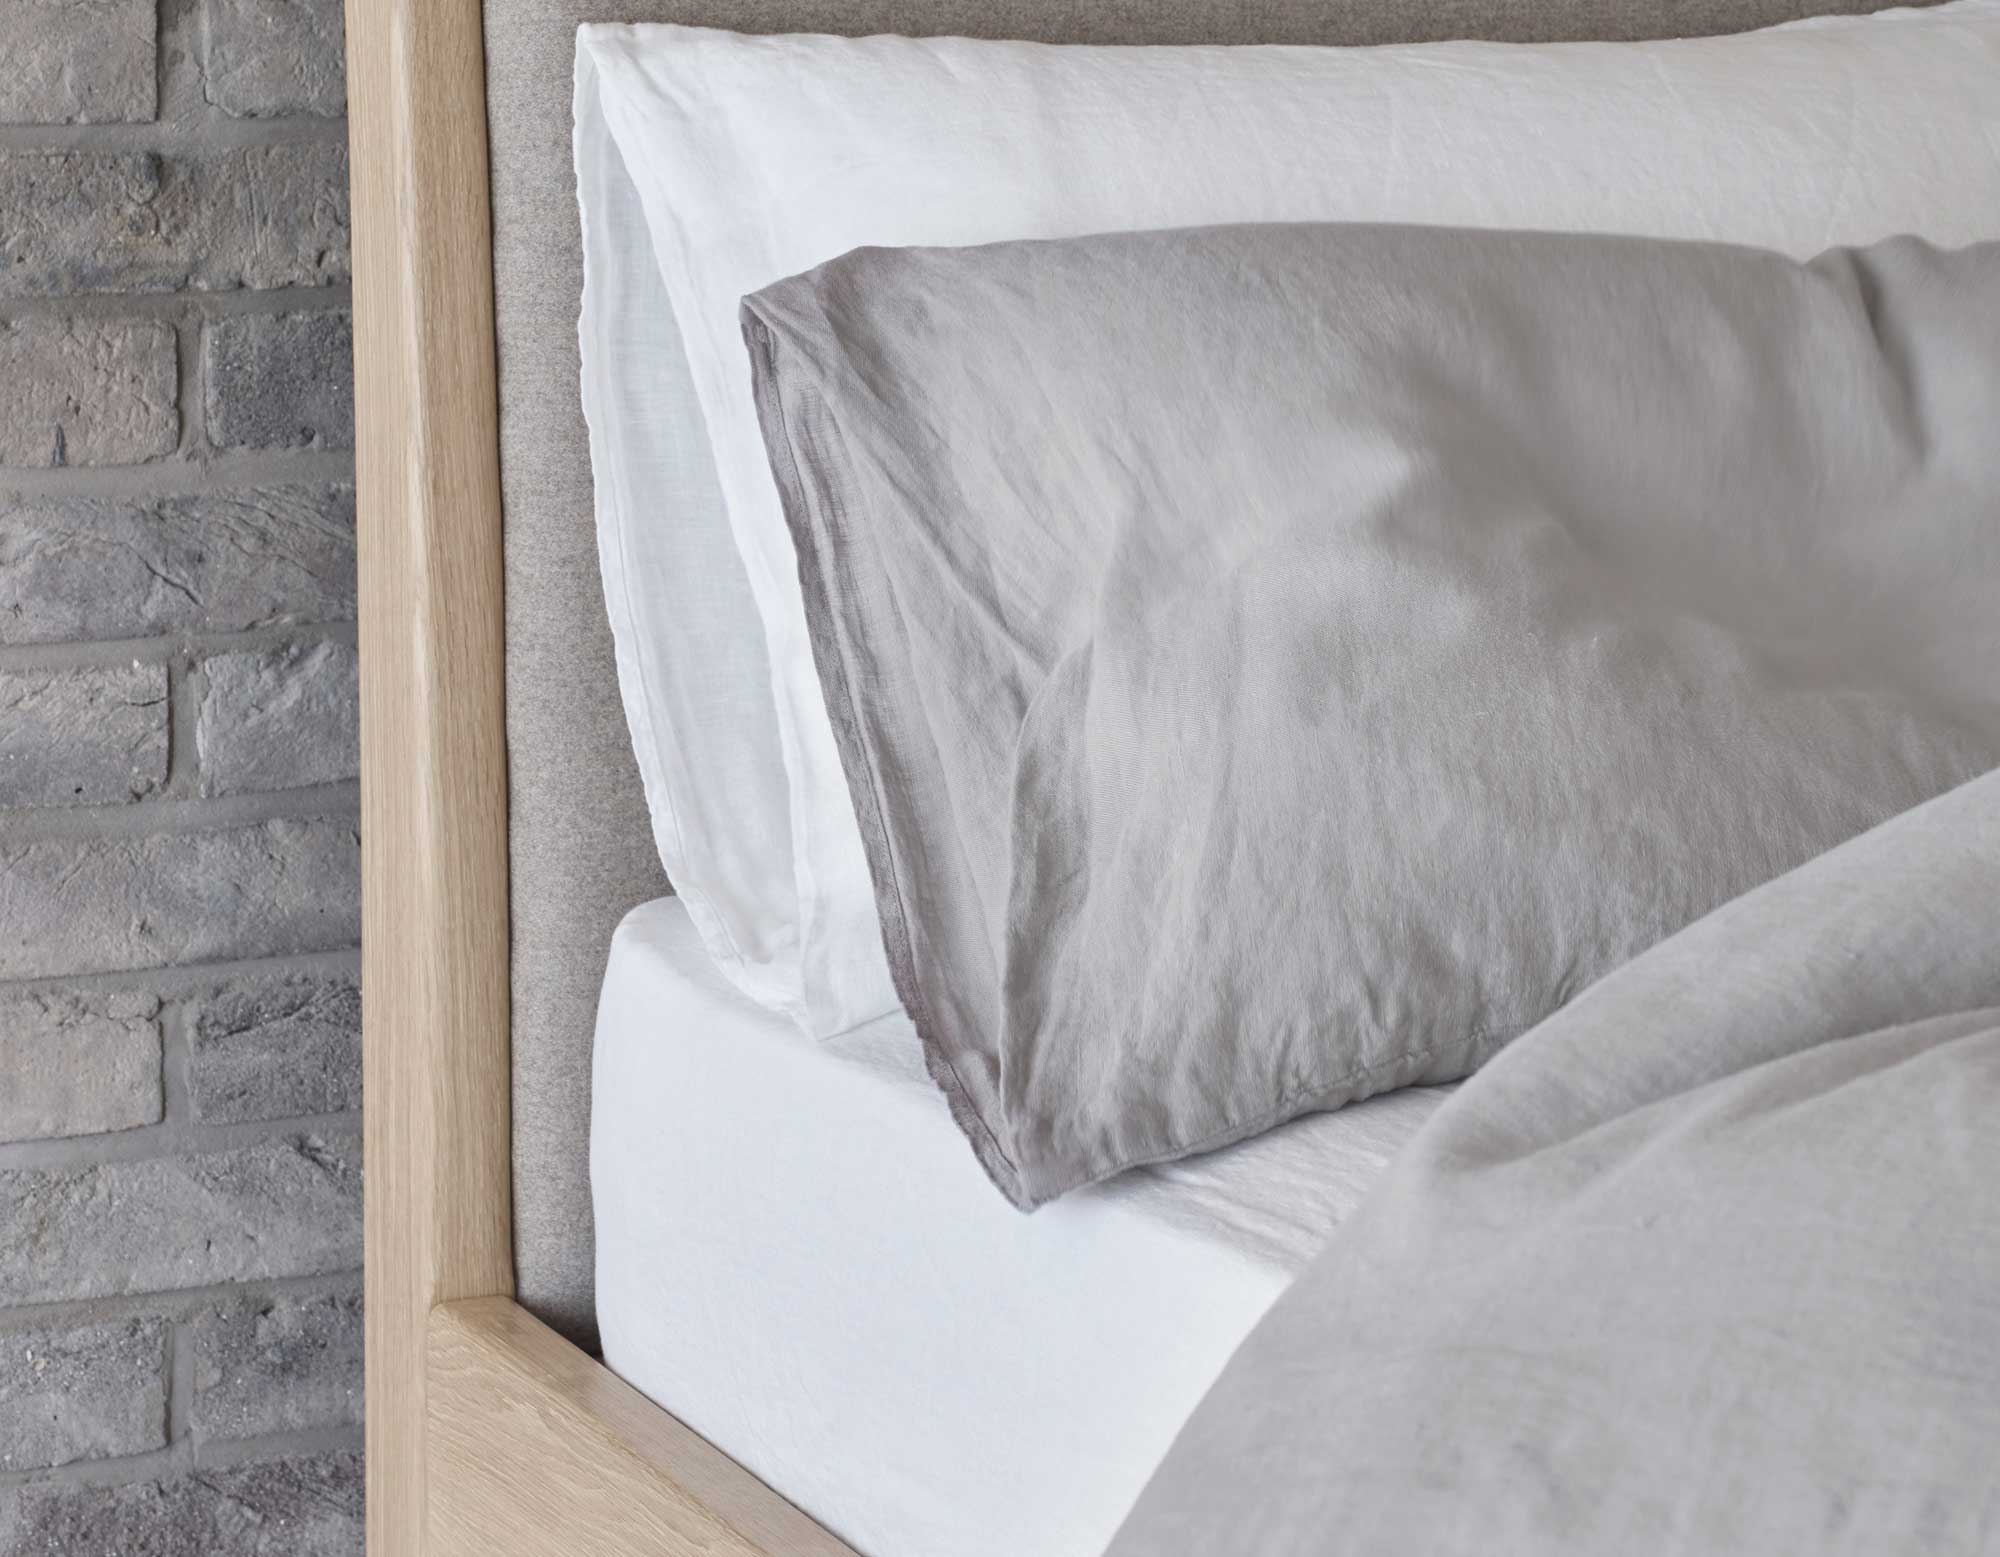 White linen fitted sheet on bed with grey and white pillowcases